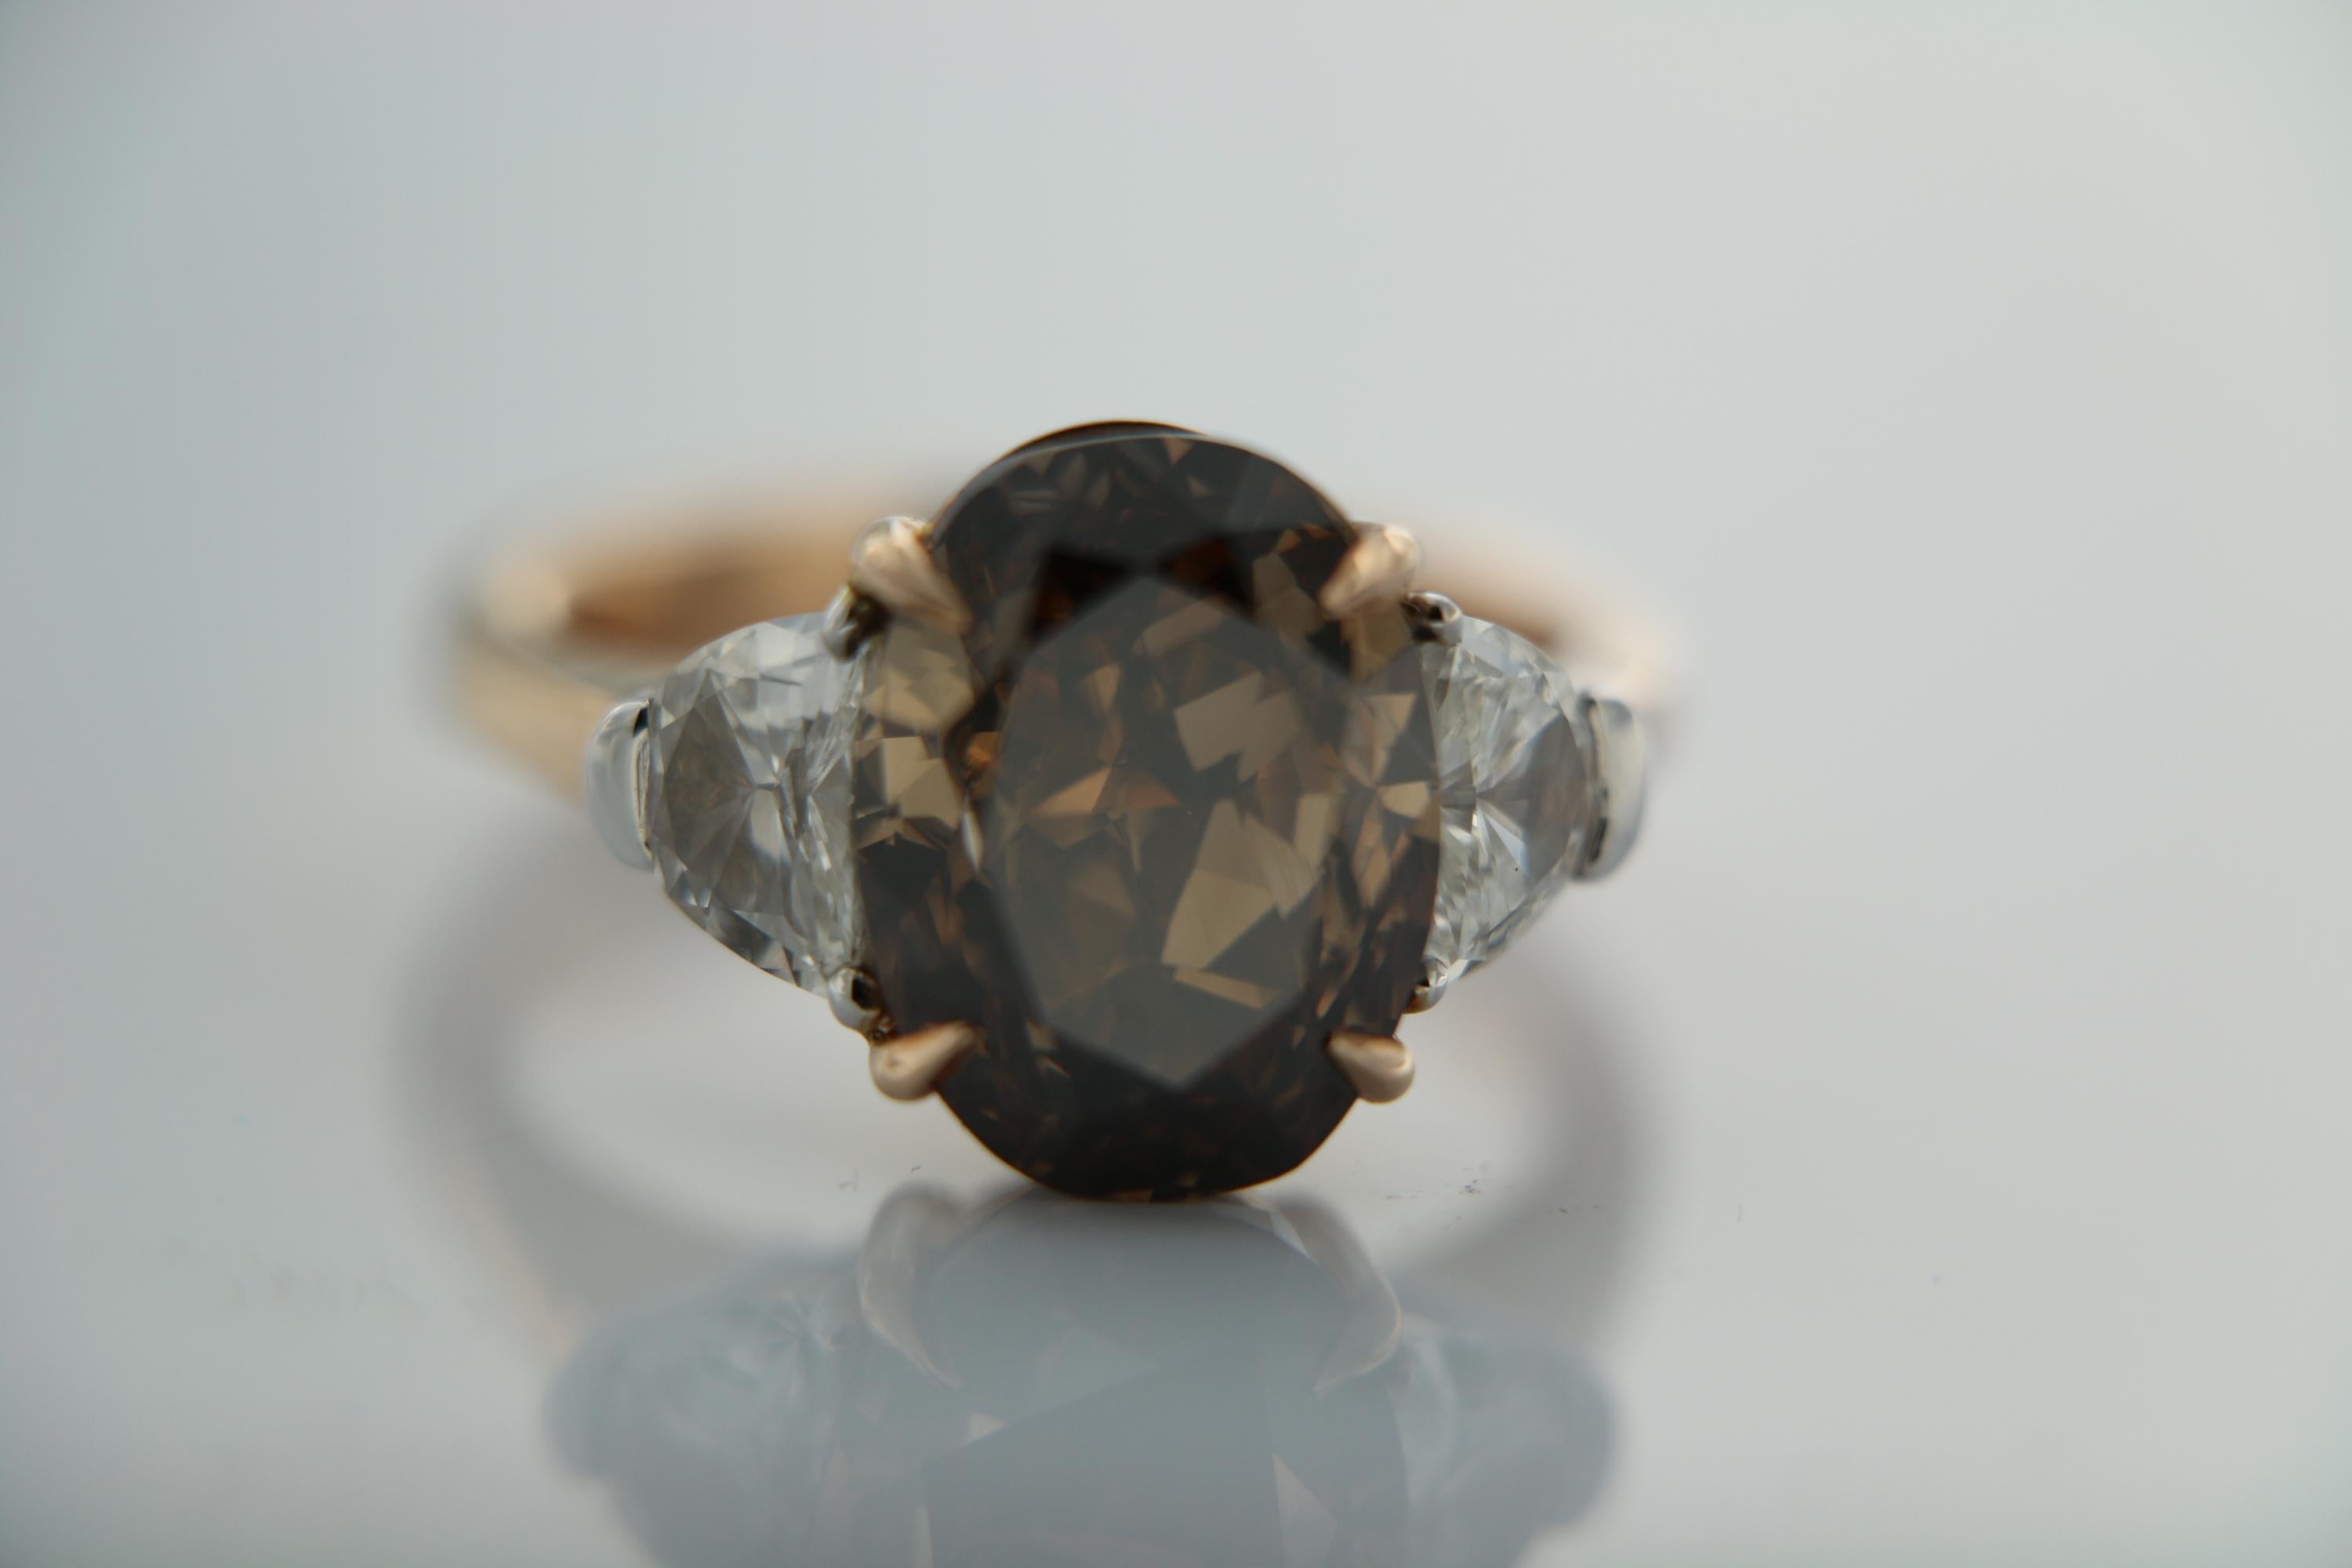 A magnificent ring designed and created by Moguldiam Inc in 18k rose gold features a GIA certified natural fancy dark orange brown oval brilliant weighing 7.07 carat with SI 2 clarity in the center flanked by  half moon diamonds on each side